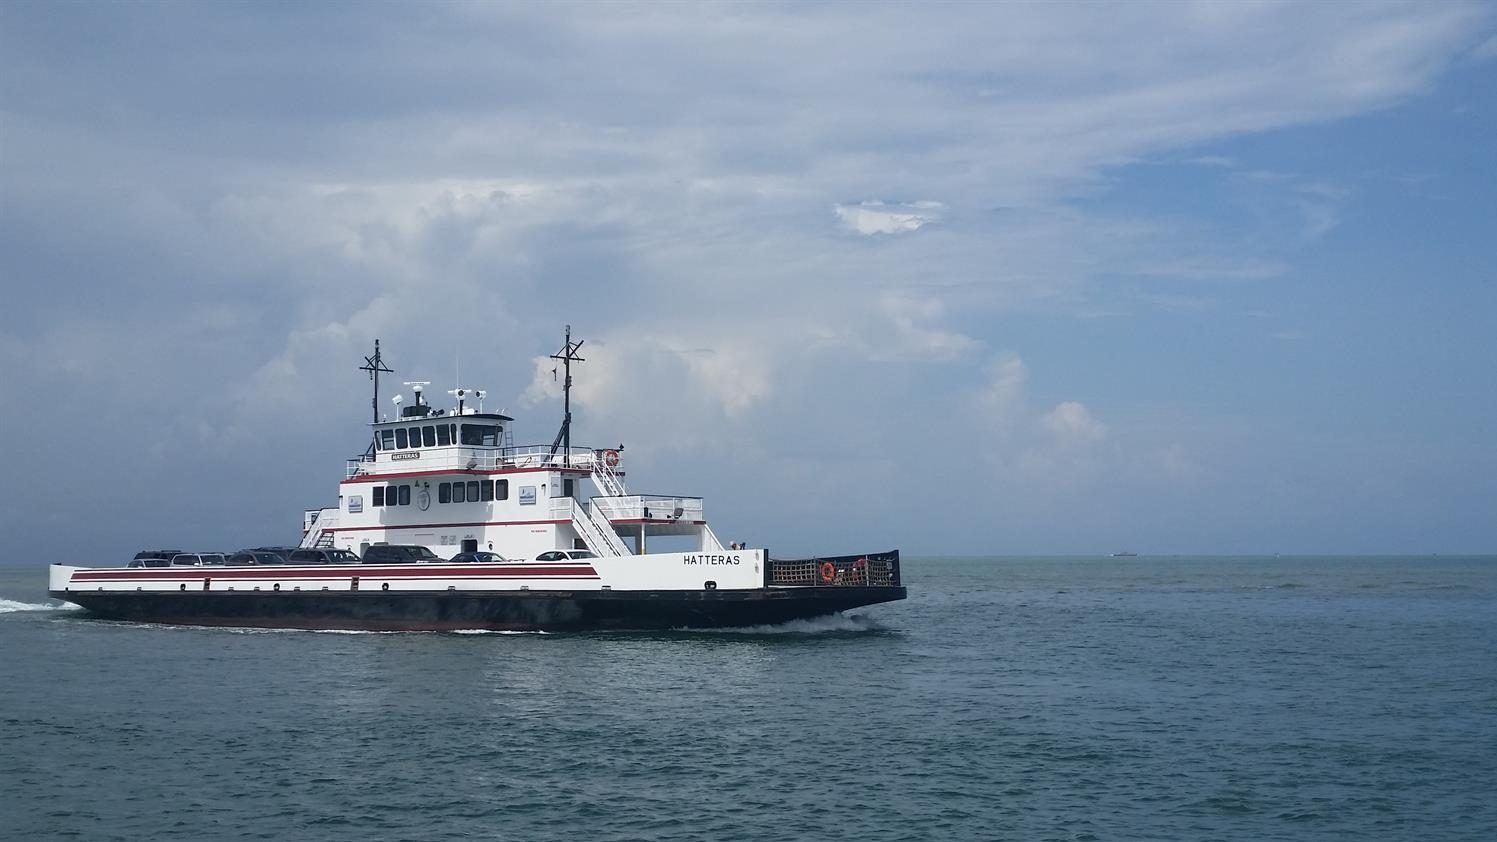 Ocracoke ferry routes shift to springtime schedules on March 7